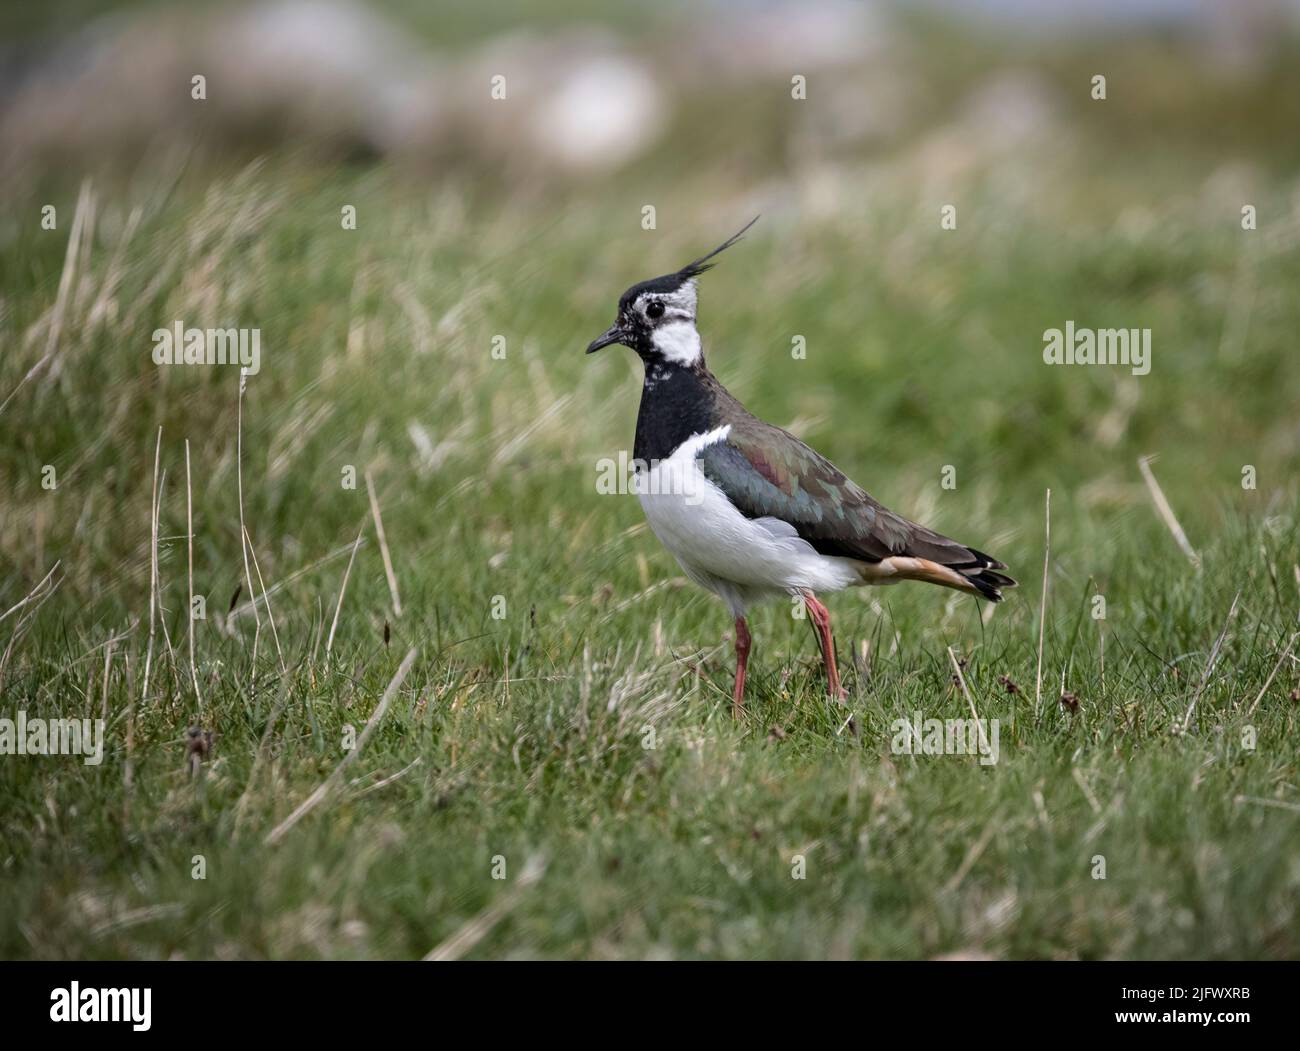 A close up in profile of an adult Lapwing Vanellus vanellus showing the splendid crest and varied colouration of the plumage on typical marsh habitat Stock Photo